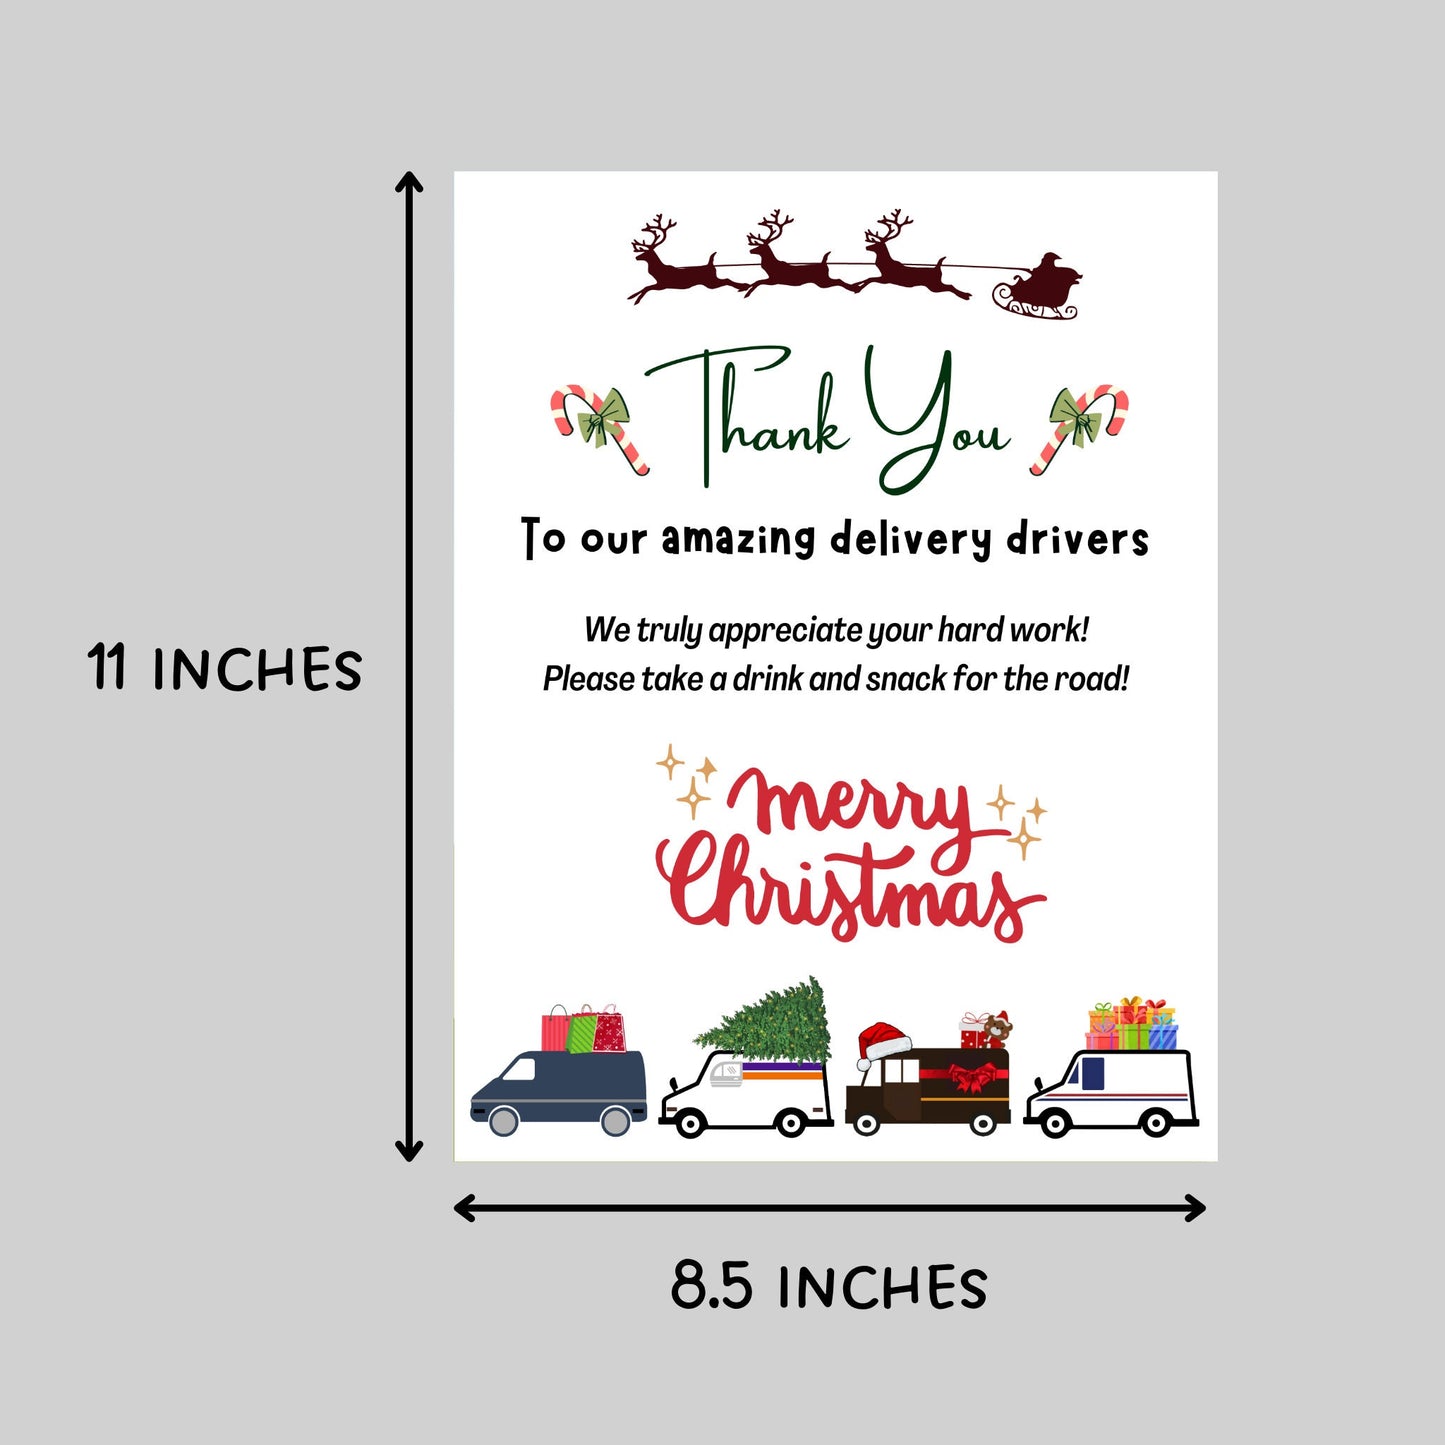 Delivery Driver Thank You Snack & Drink Sign, Christmas Delivery Driver Appreciation Sign, Mail Carrier Treat Basket Printable Sign